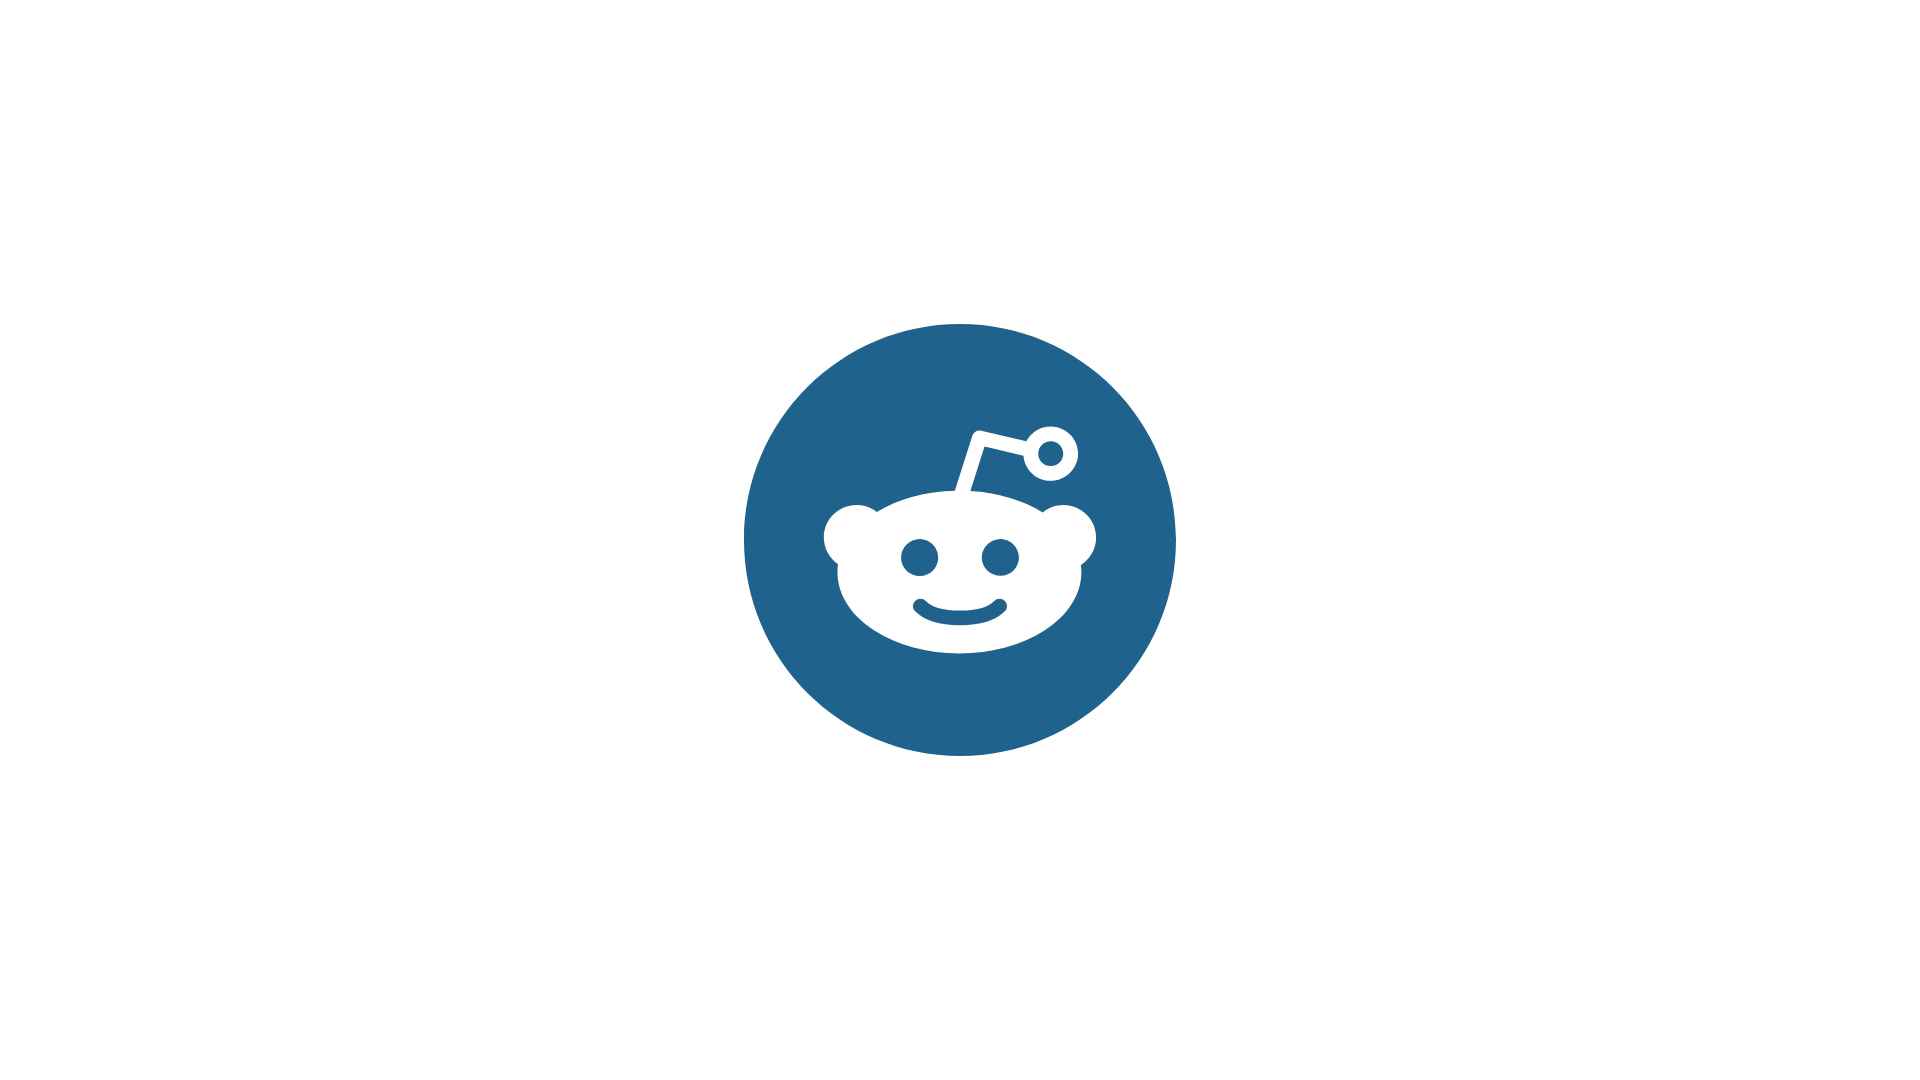 Can users engage in private messaging or direct communication on Reddit?